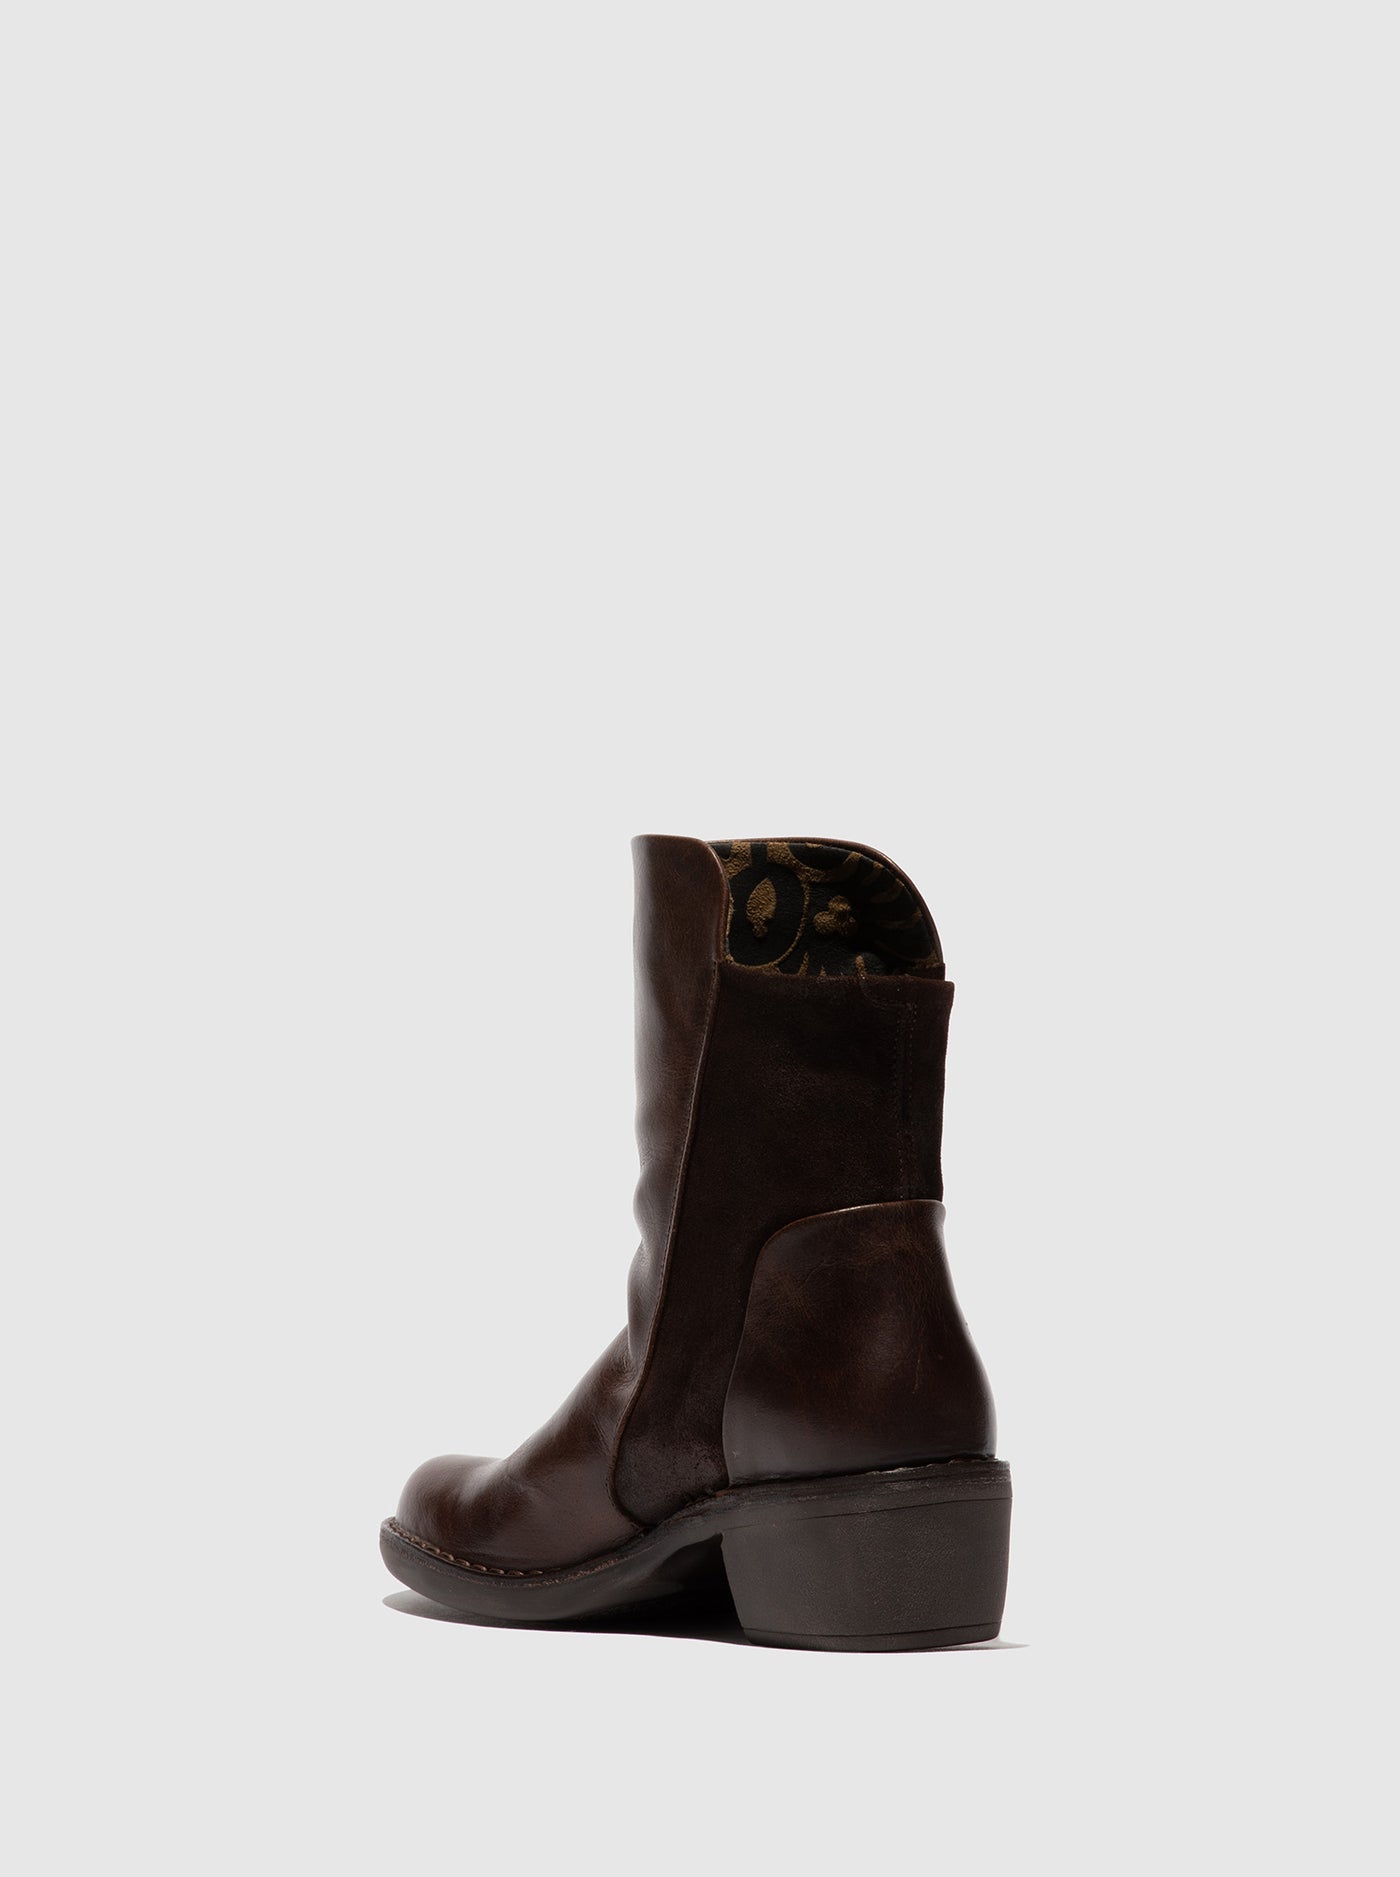 Zip Up Ankle Boots MELY074FLY RUG/OILSUEDE DK BROWN/EXPRESSO